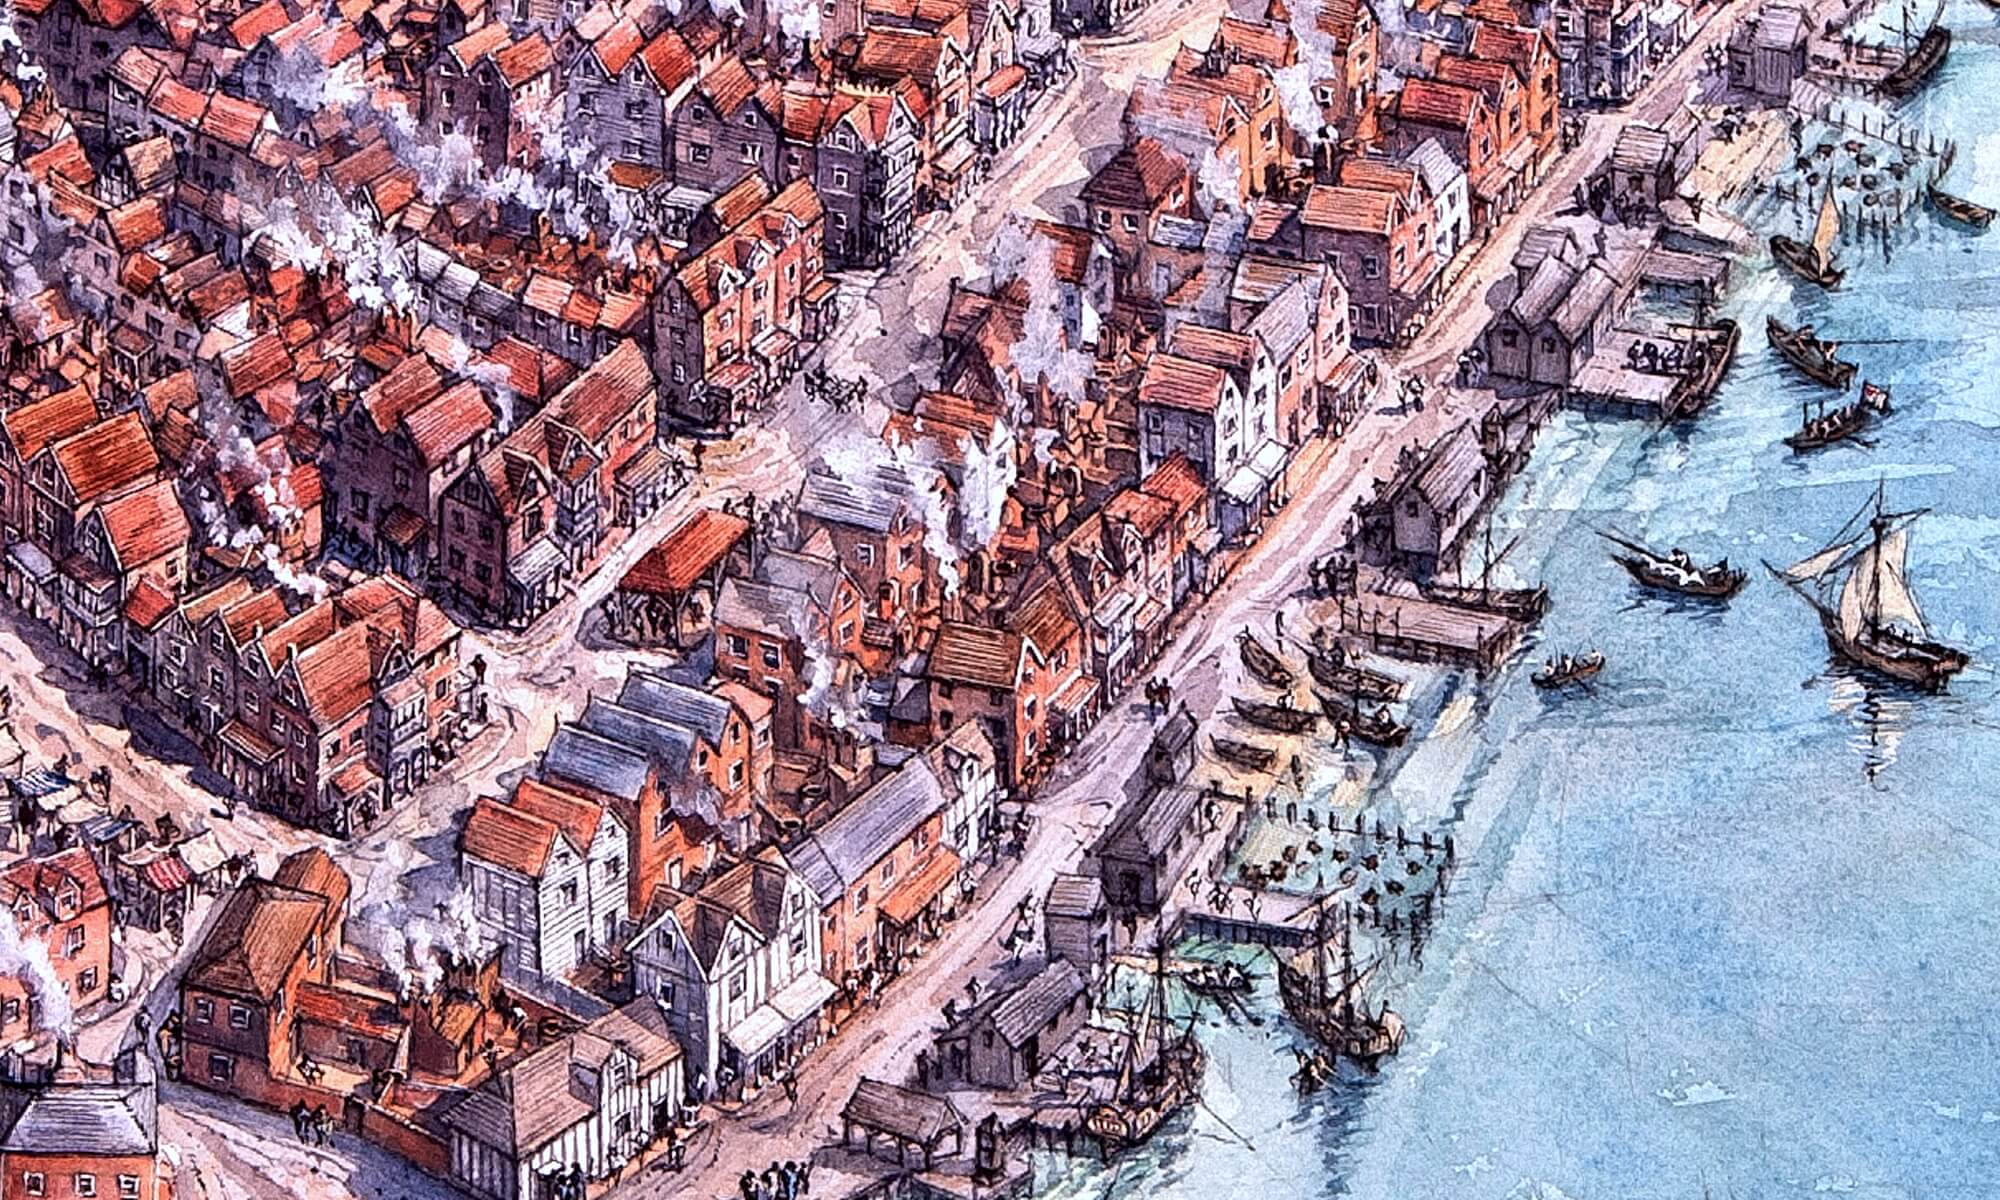 Port Royal Town in 1690